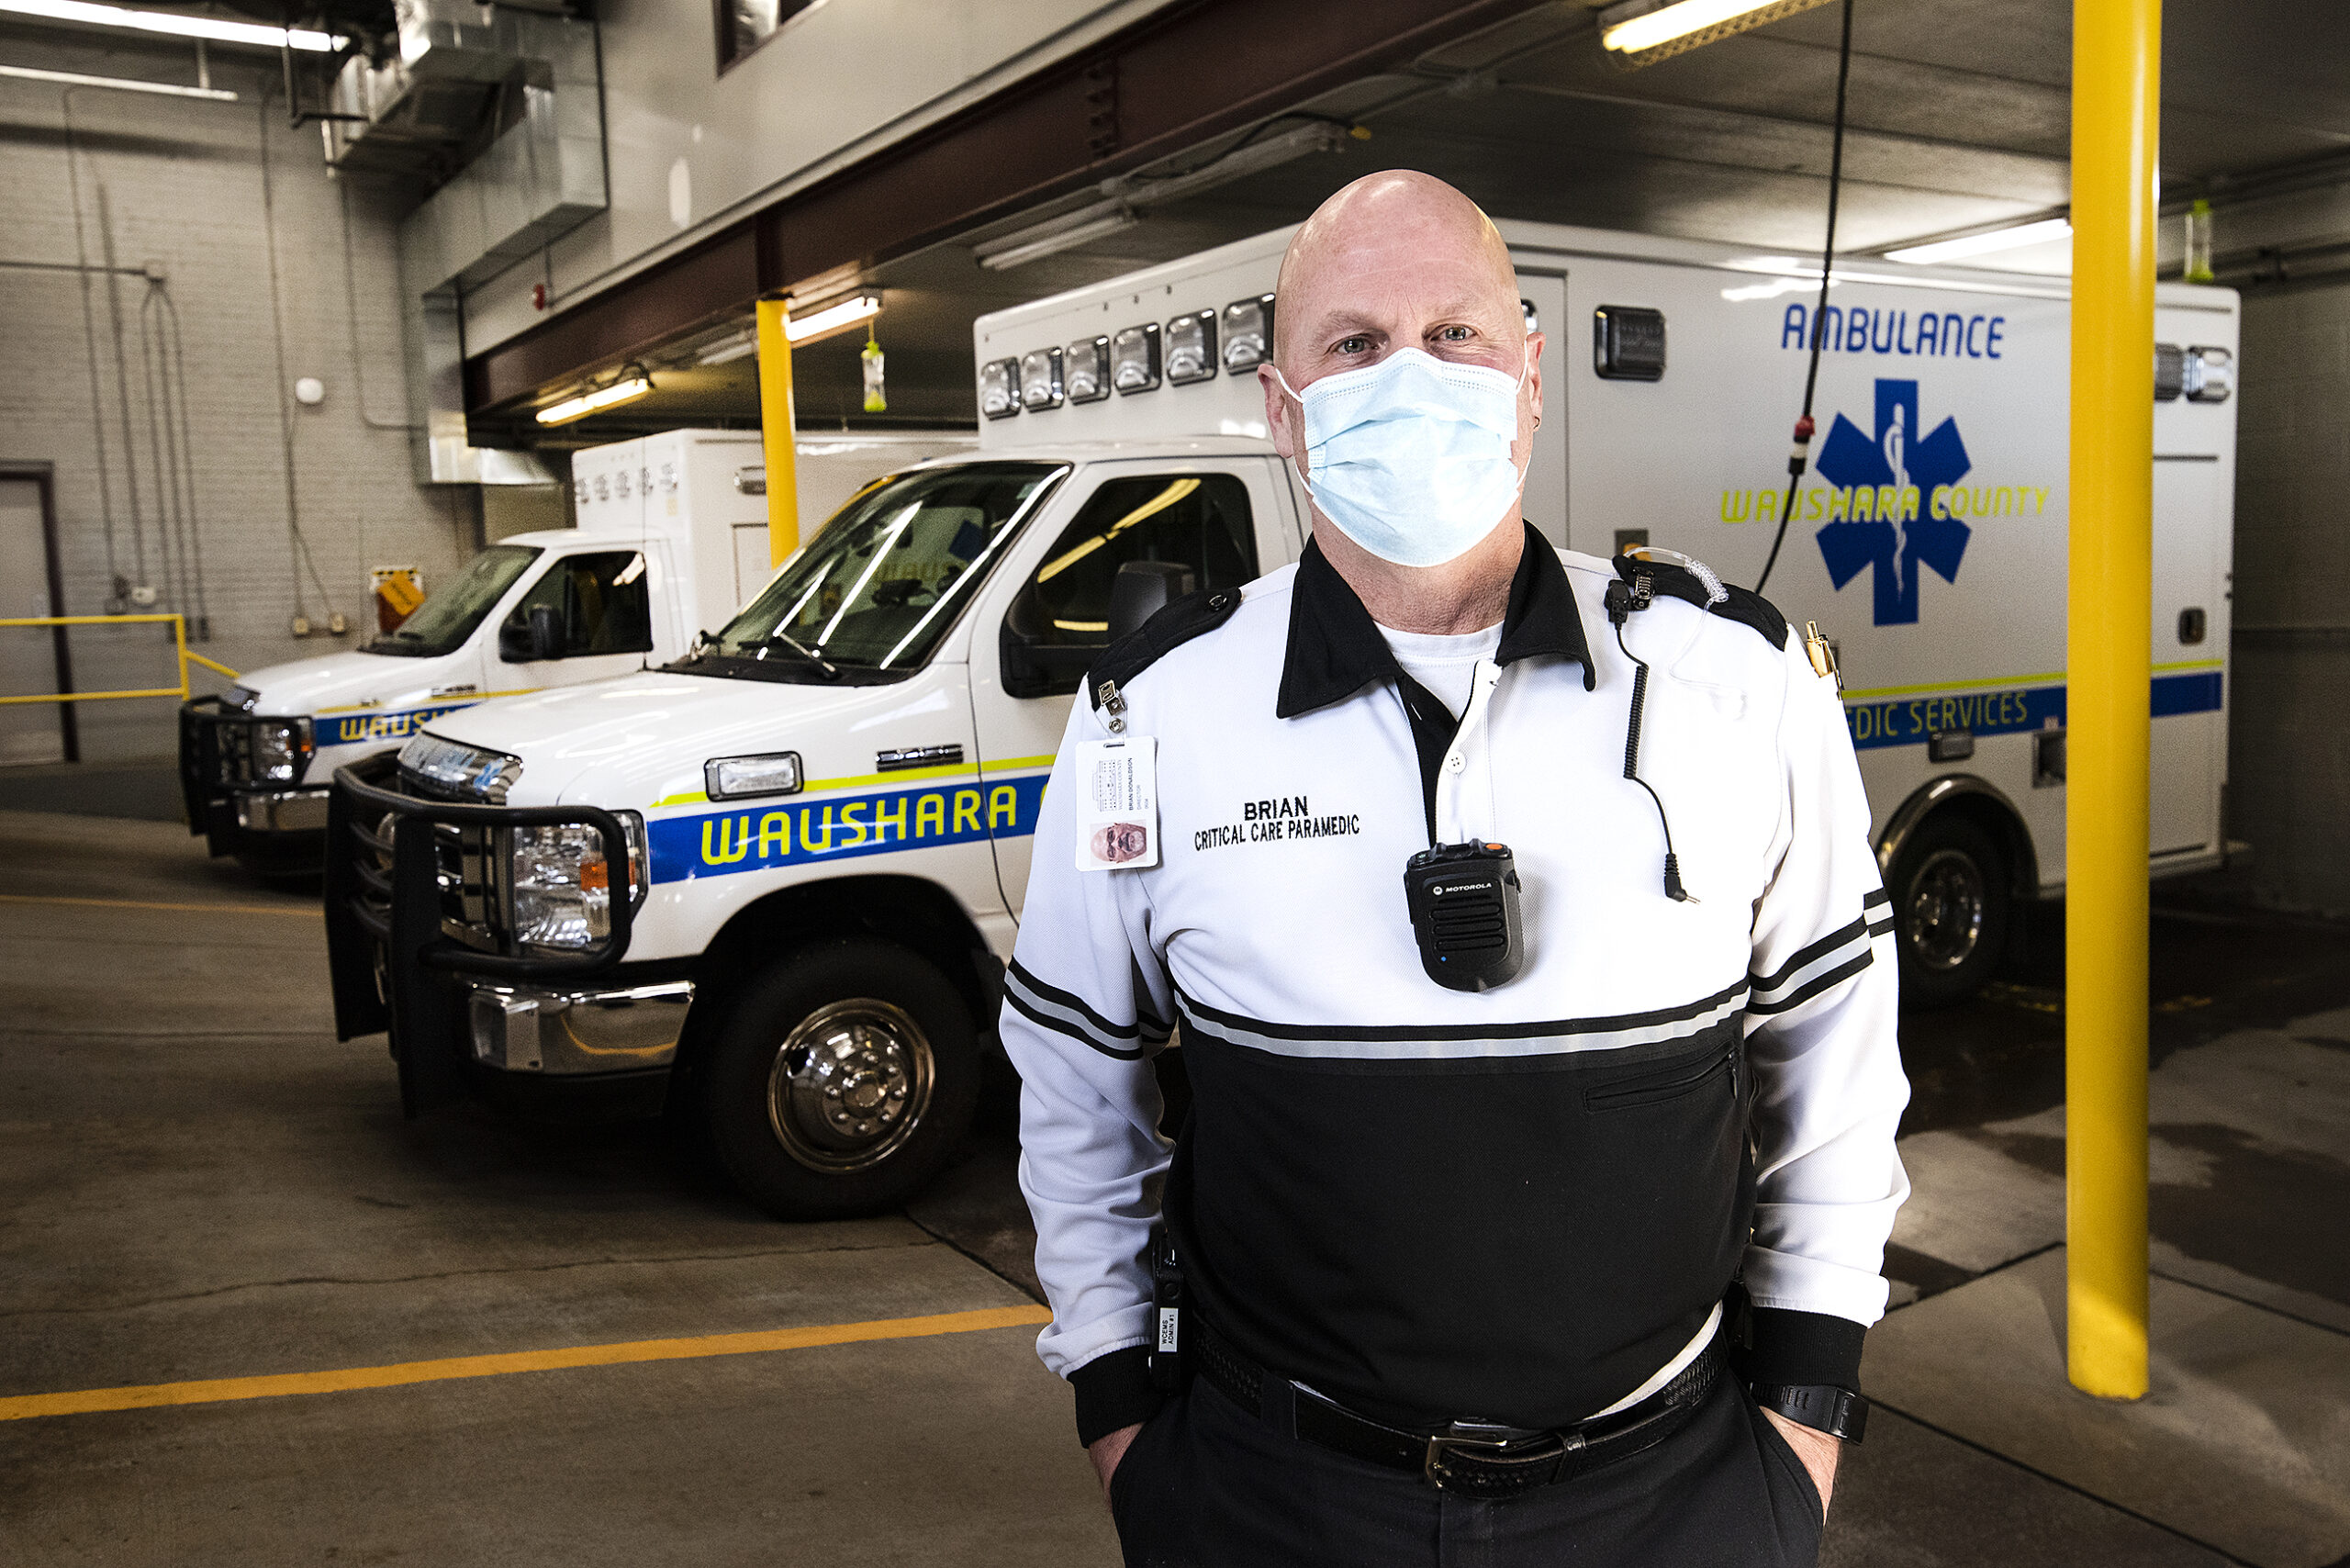 A man stands in the ambulance garage area.